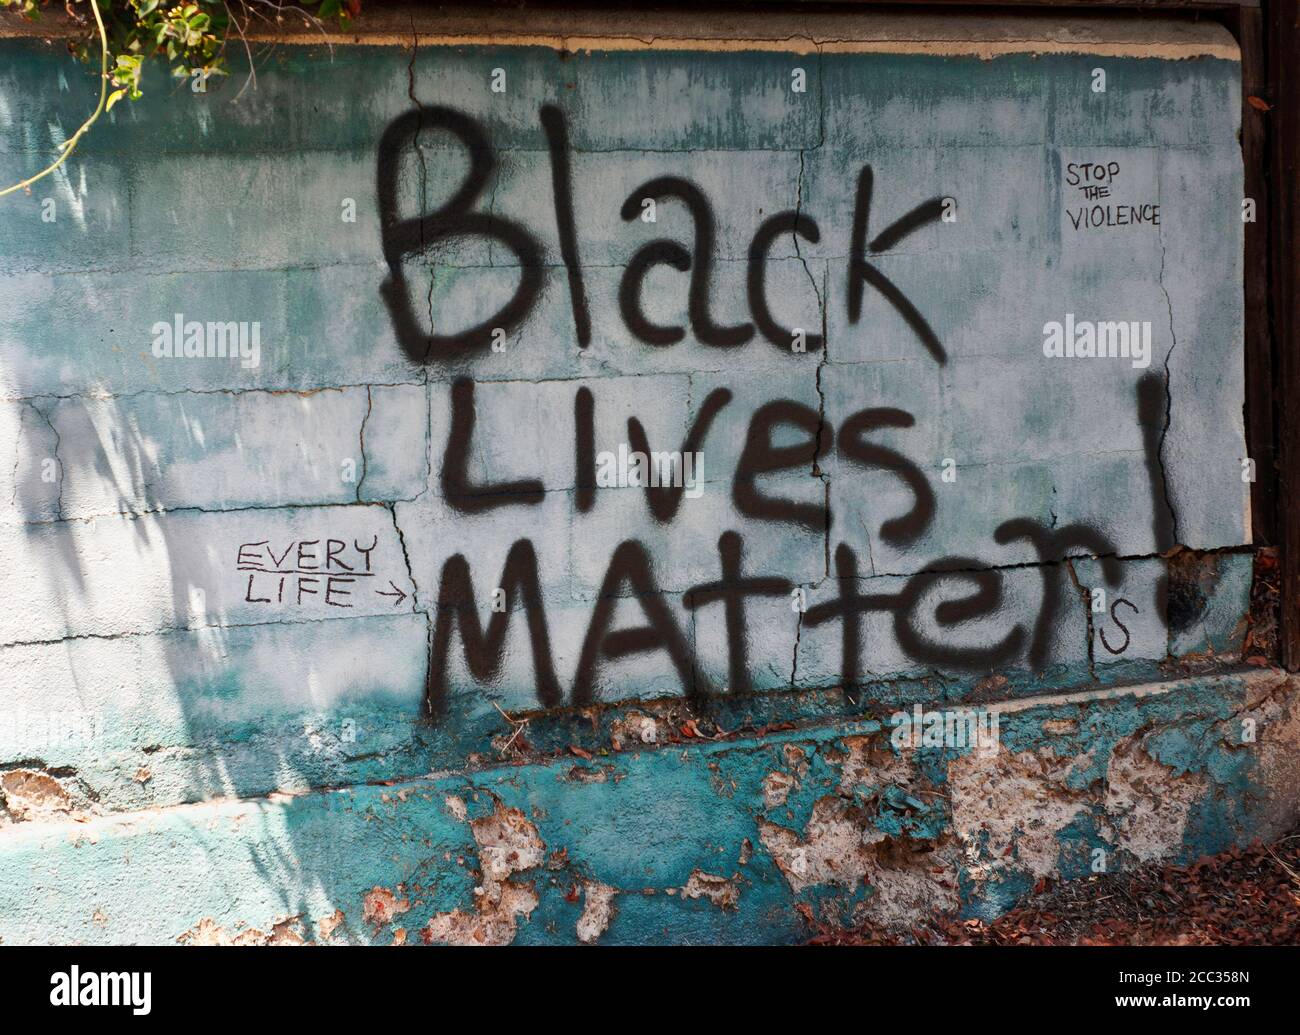 Graffiti words on cement wall by sidewalk. Black lives matter. Every Life. Stop the violence. Stock Photo